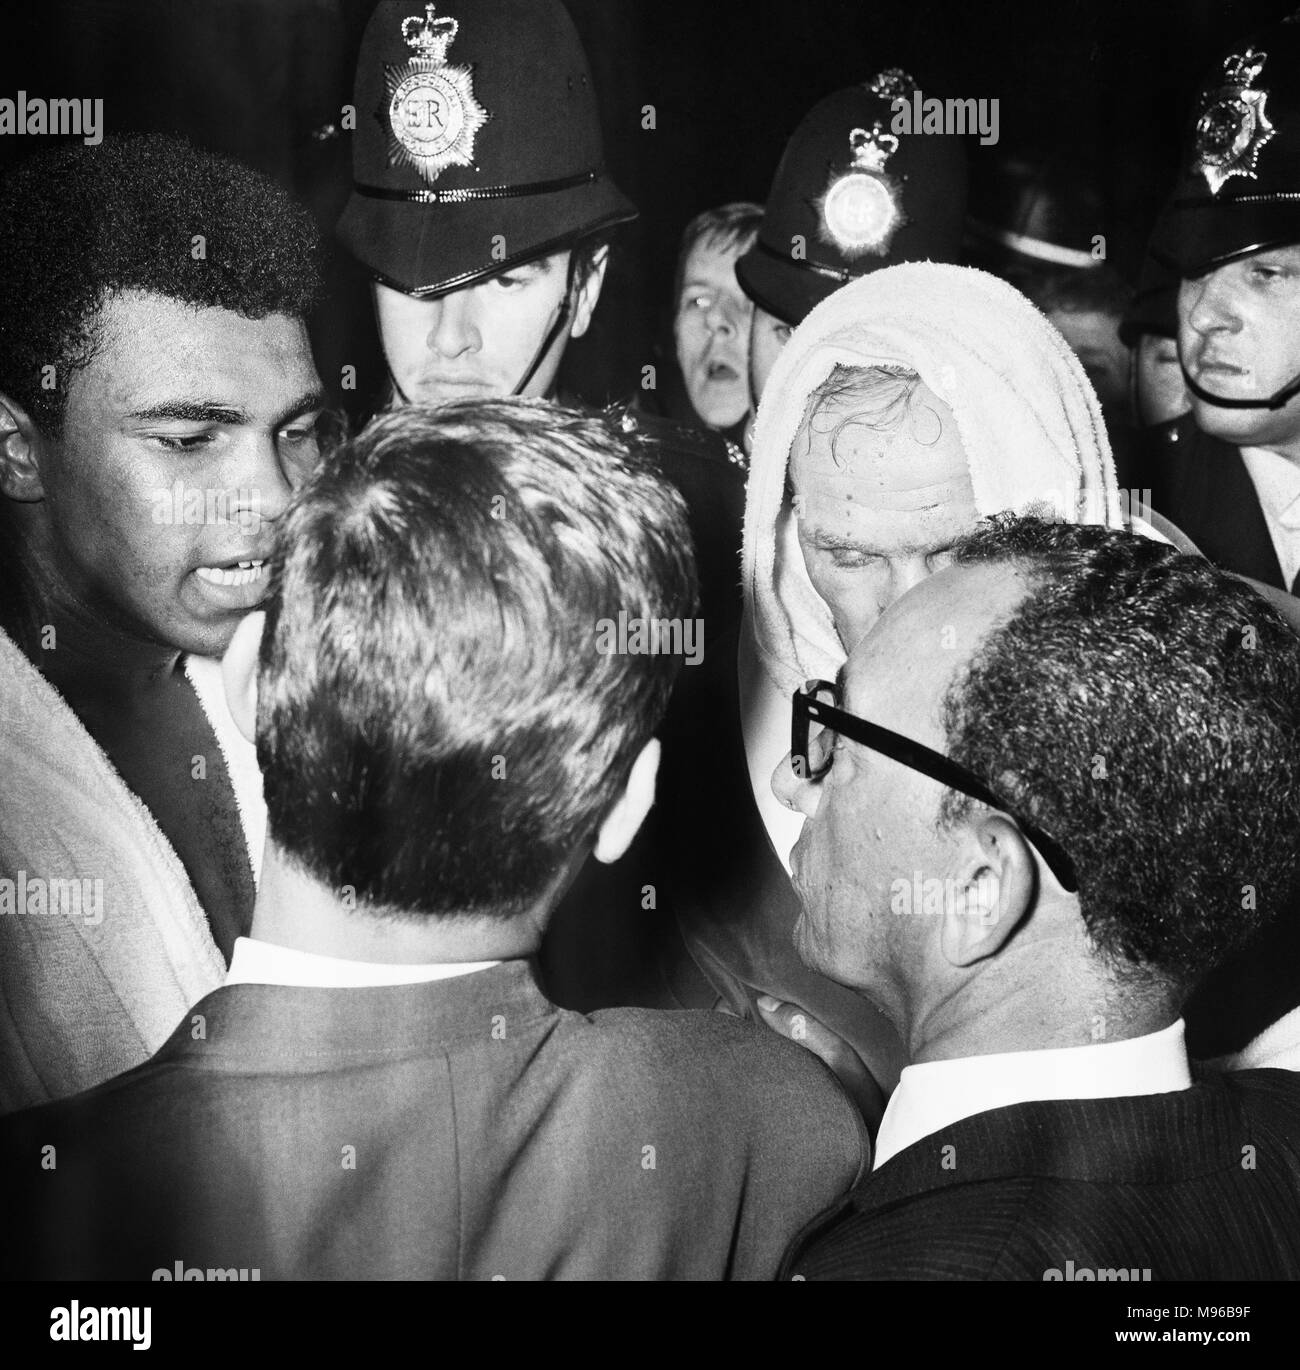 World heavyweight title fight between American champion Cassius Clay and British challenger Henry Cooper at Highbury Stadium, North London. Clay won in the sixth round when the referee had to stop the fight due to a deep gash opening above Cooper's left eye. (Picture) Ali (left) and Cooper (right) after the fight 21st May 1966. Stock Photo